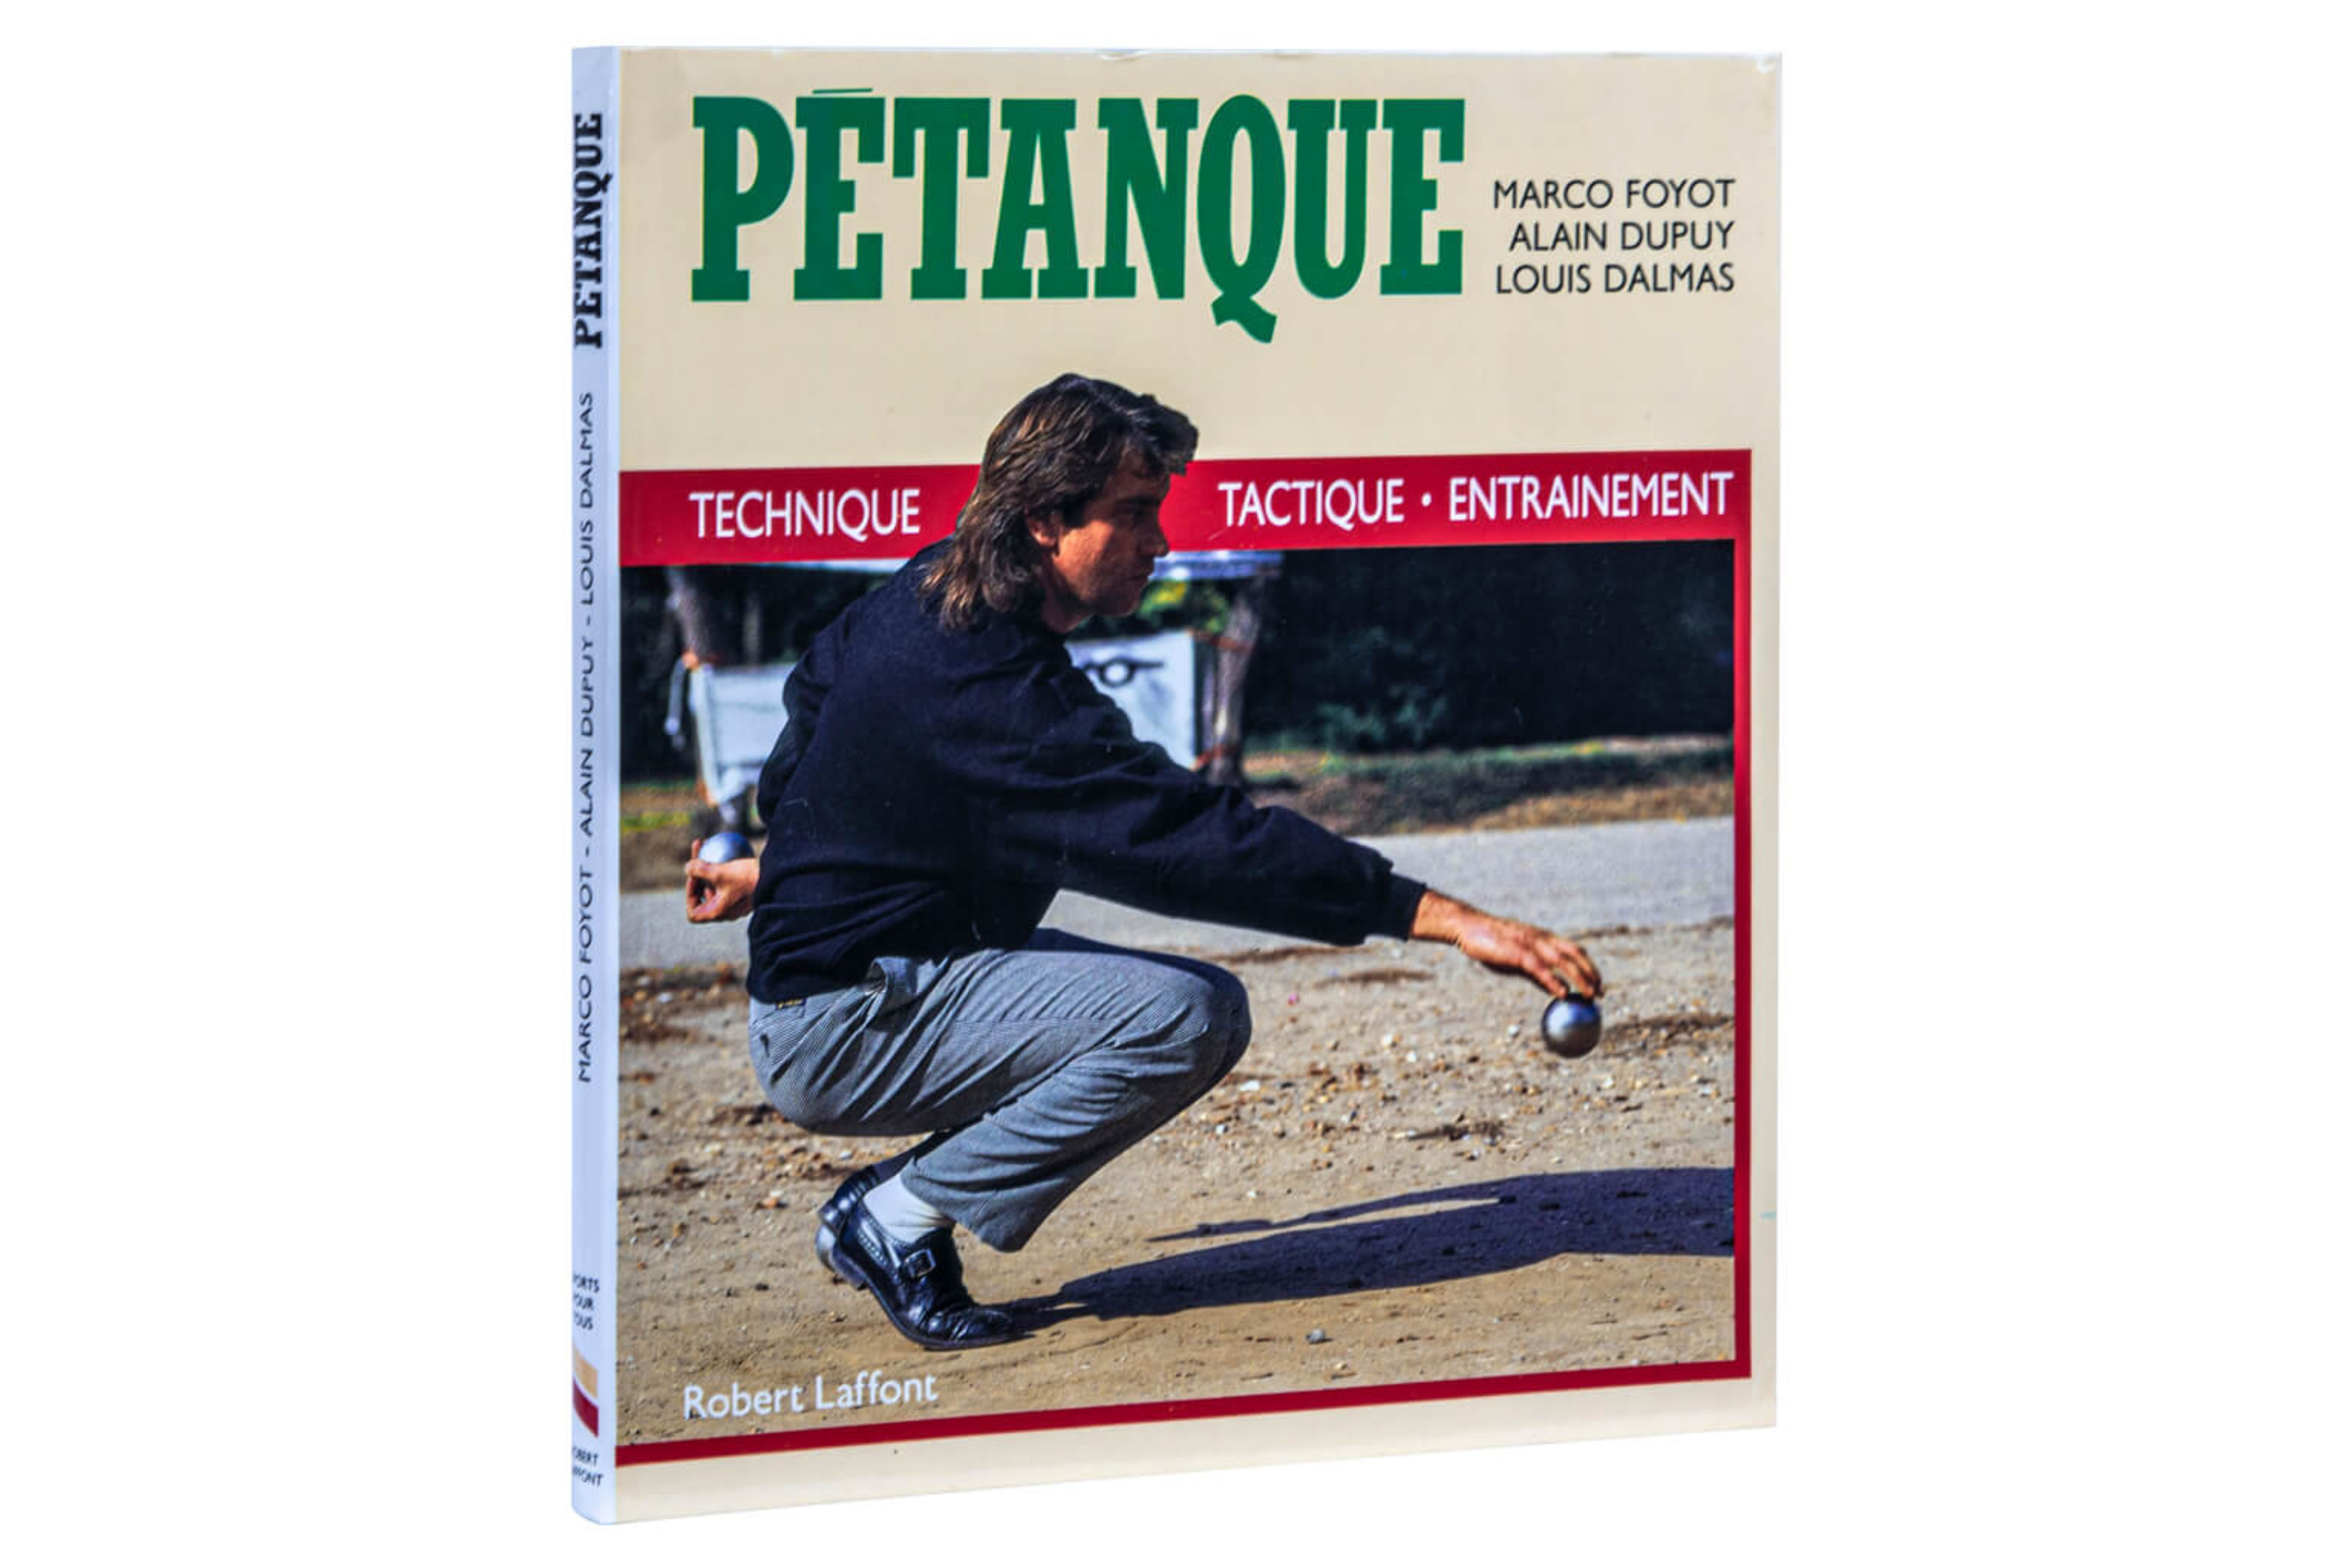 PETANQUE – FRENCH BOOK